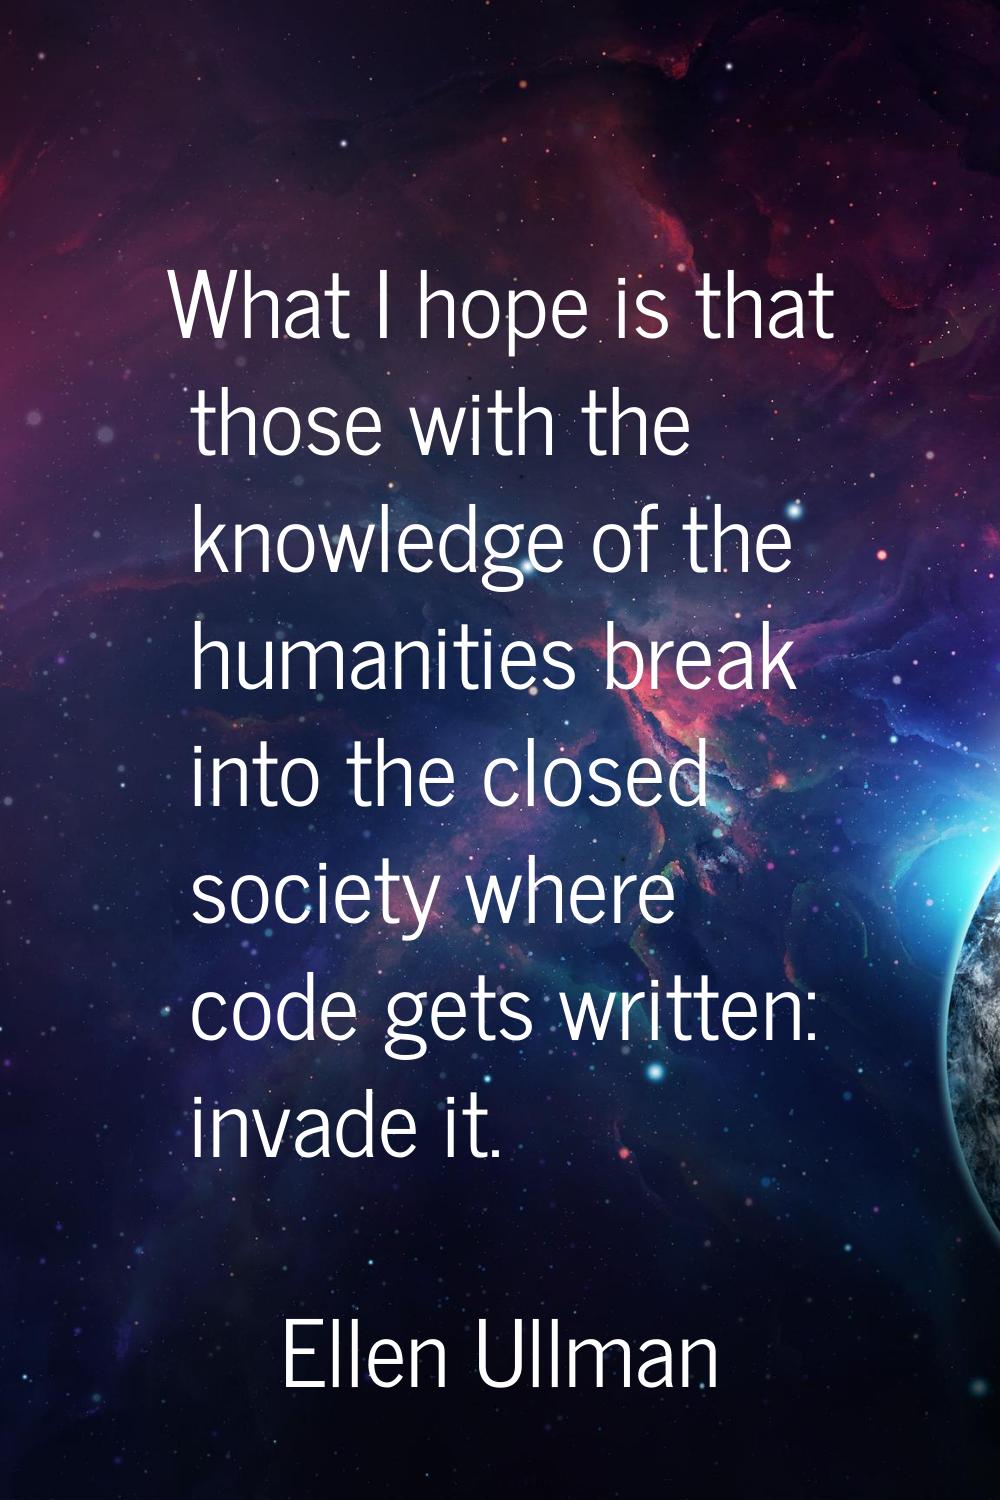 What I hope is that those with the knowledge of the humanities break into the closed society where 